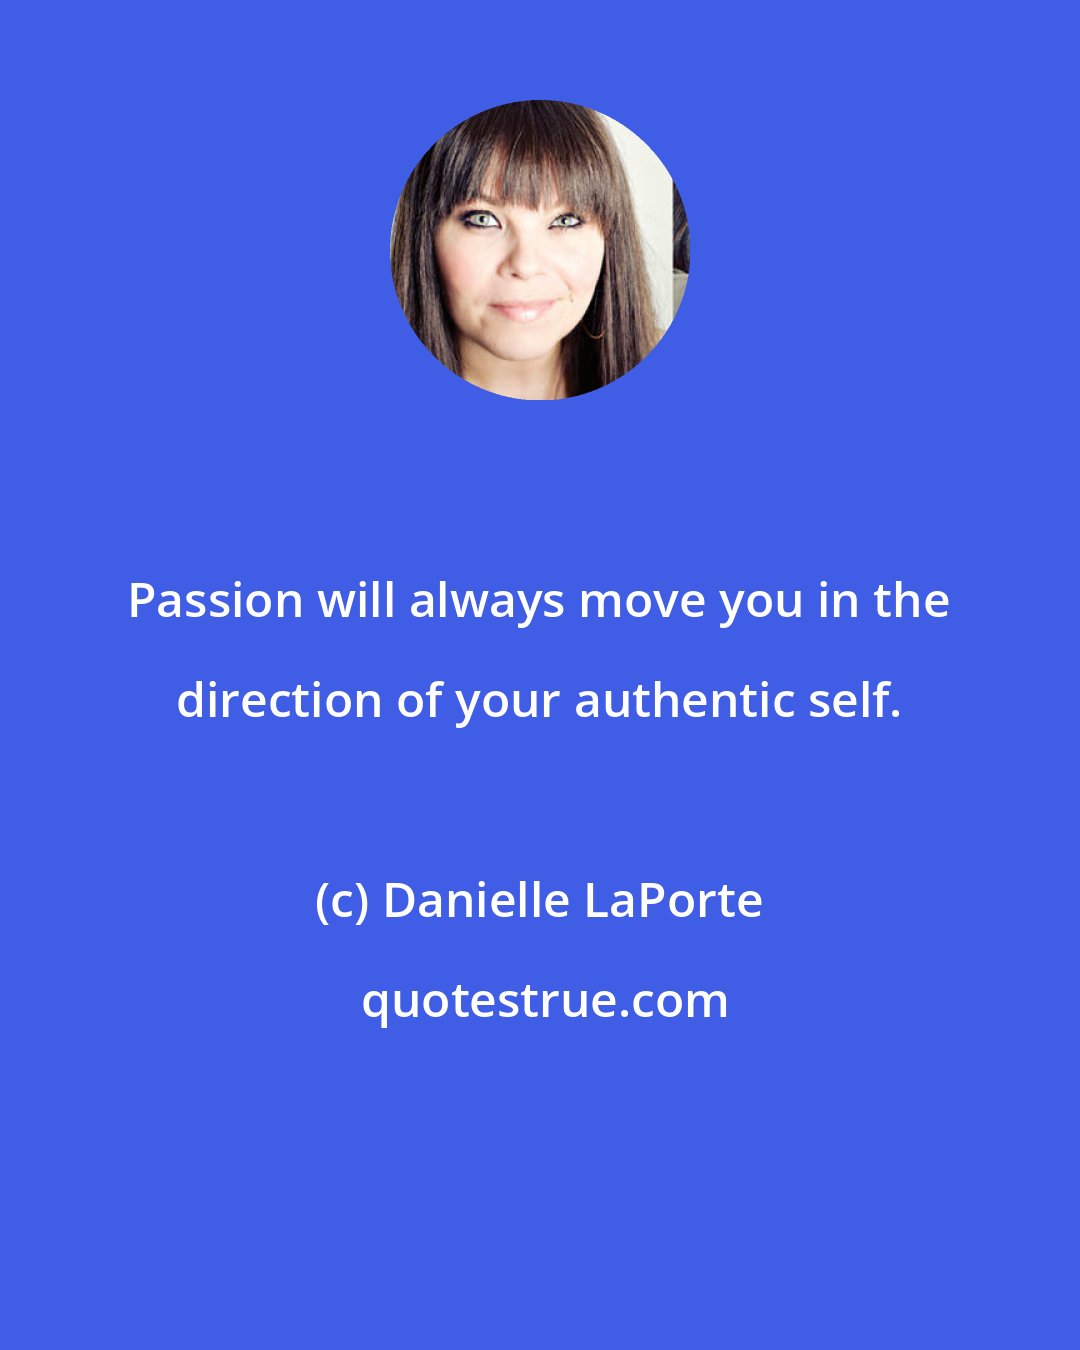 Danielle LaPorte: Passion will always move you in the direction of your authentic self.